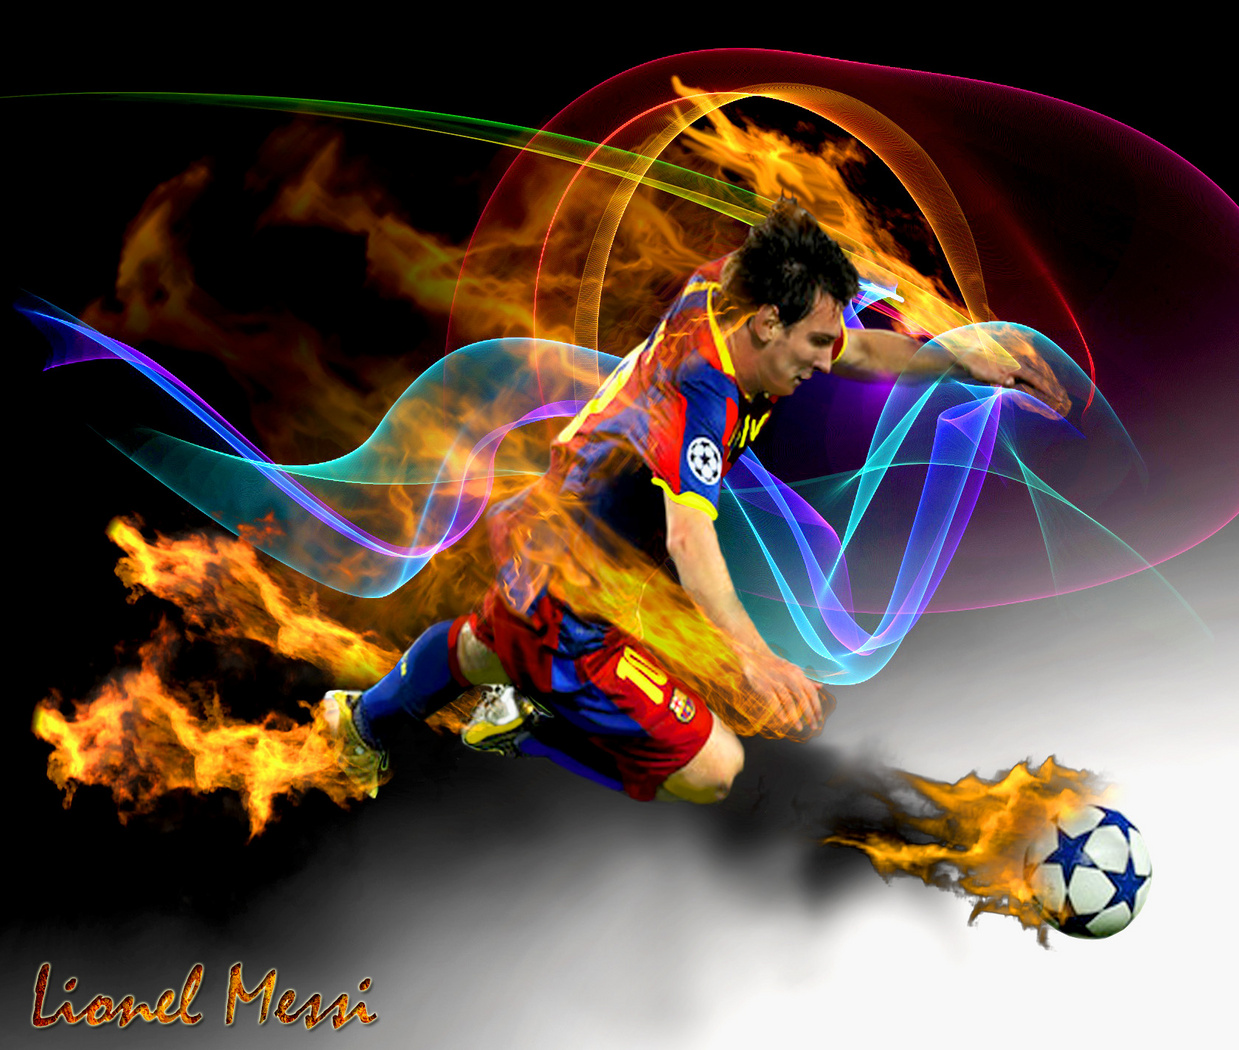 Lionel Messi Wallpaper Craftily Created